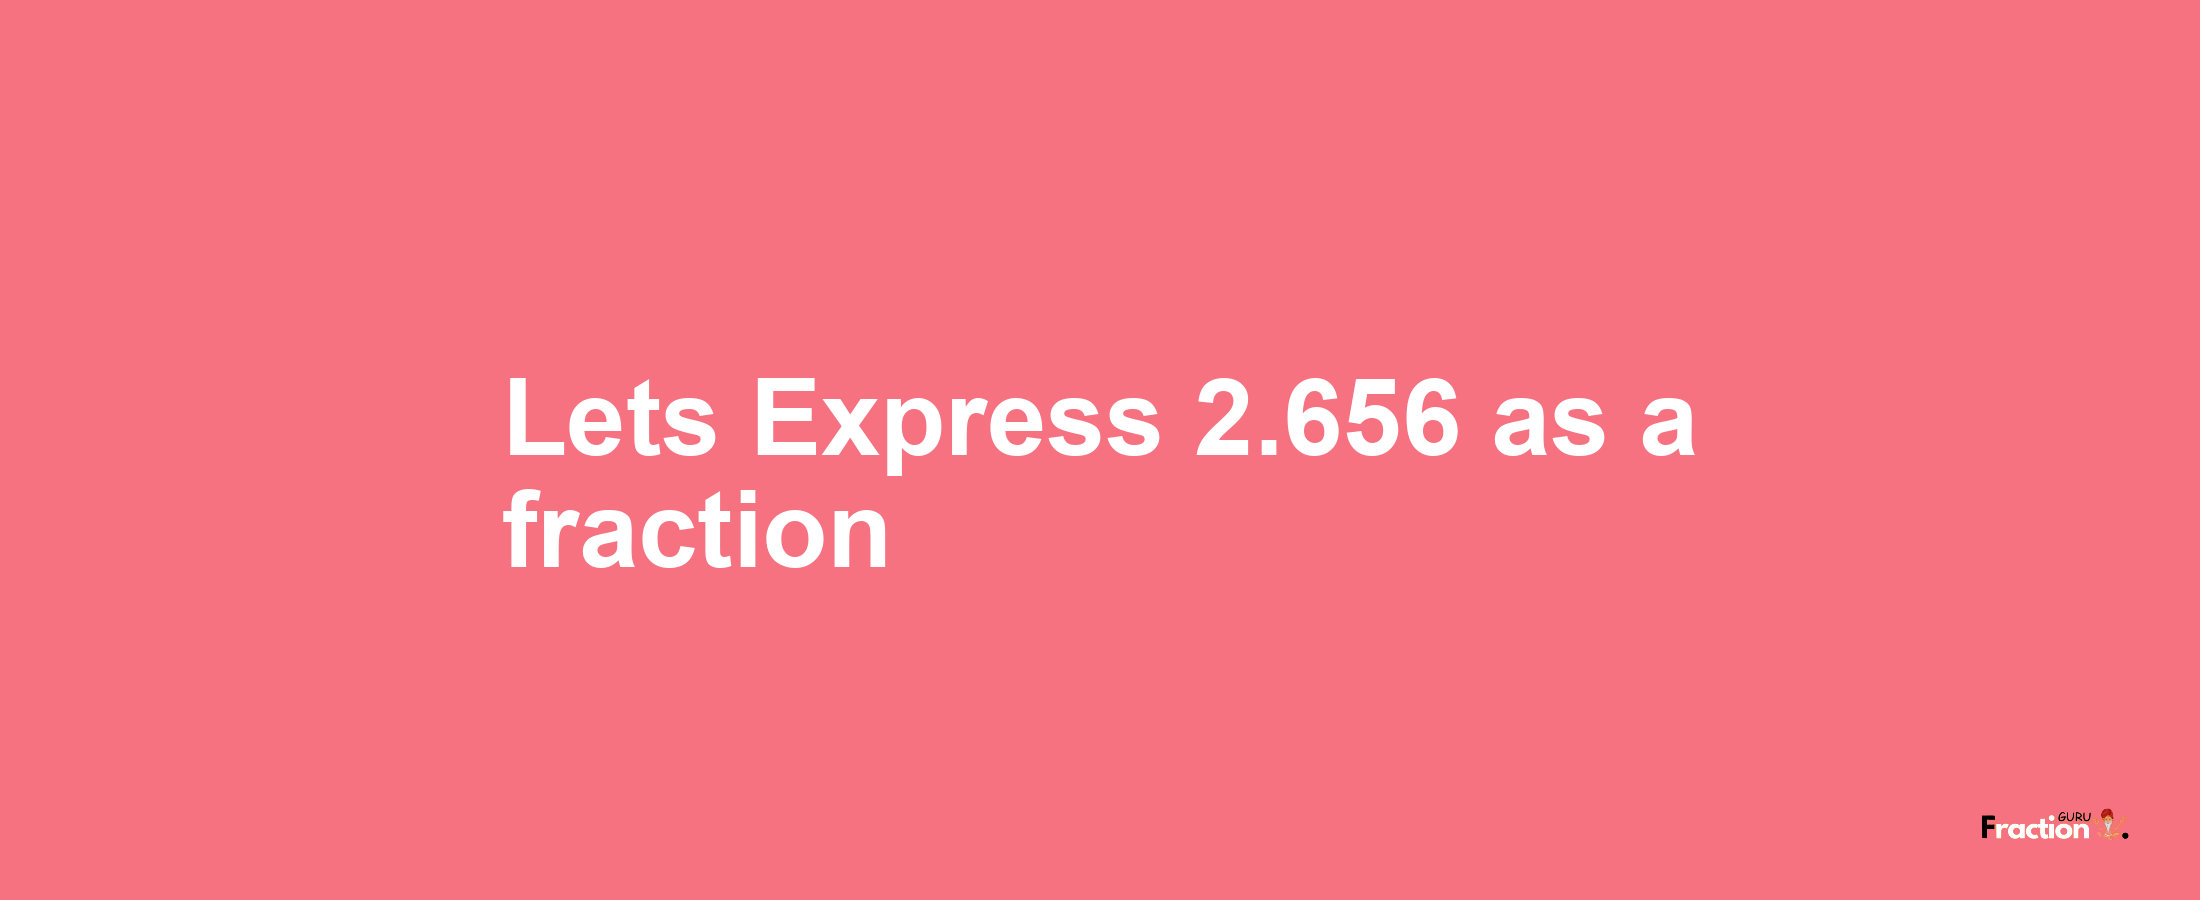 Lets Express 2.656 as afraction